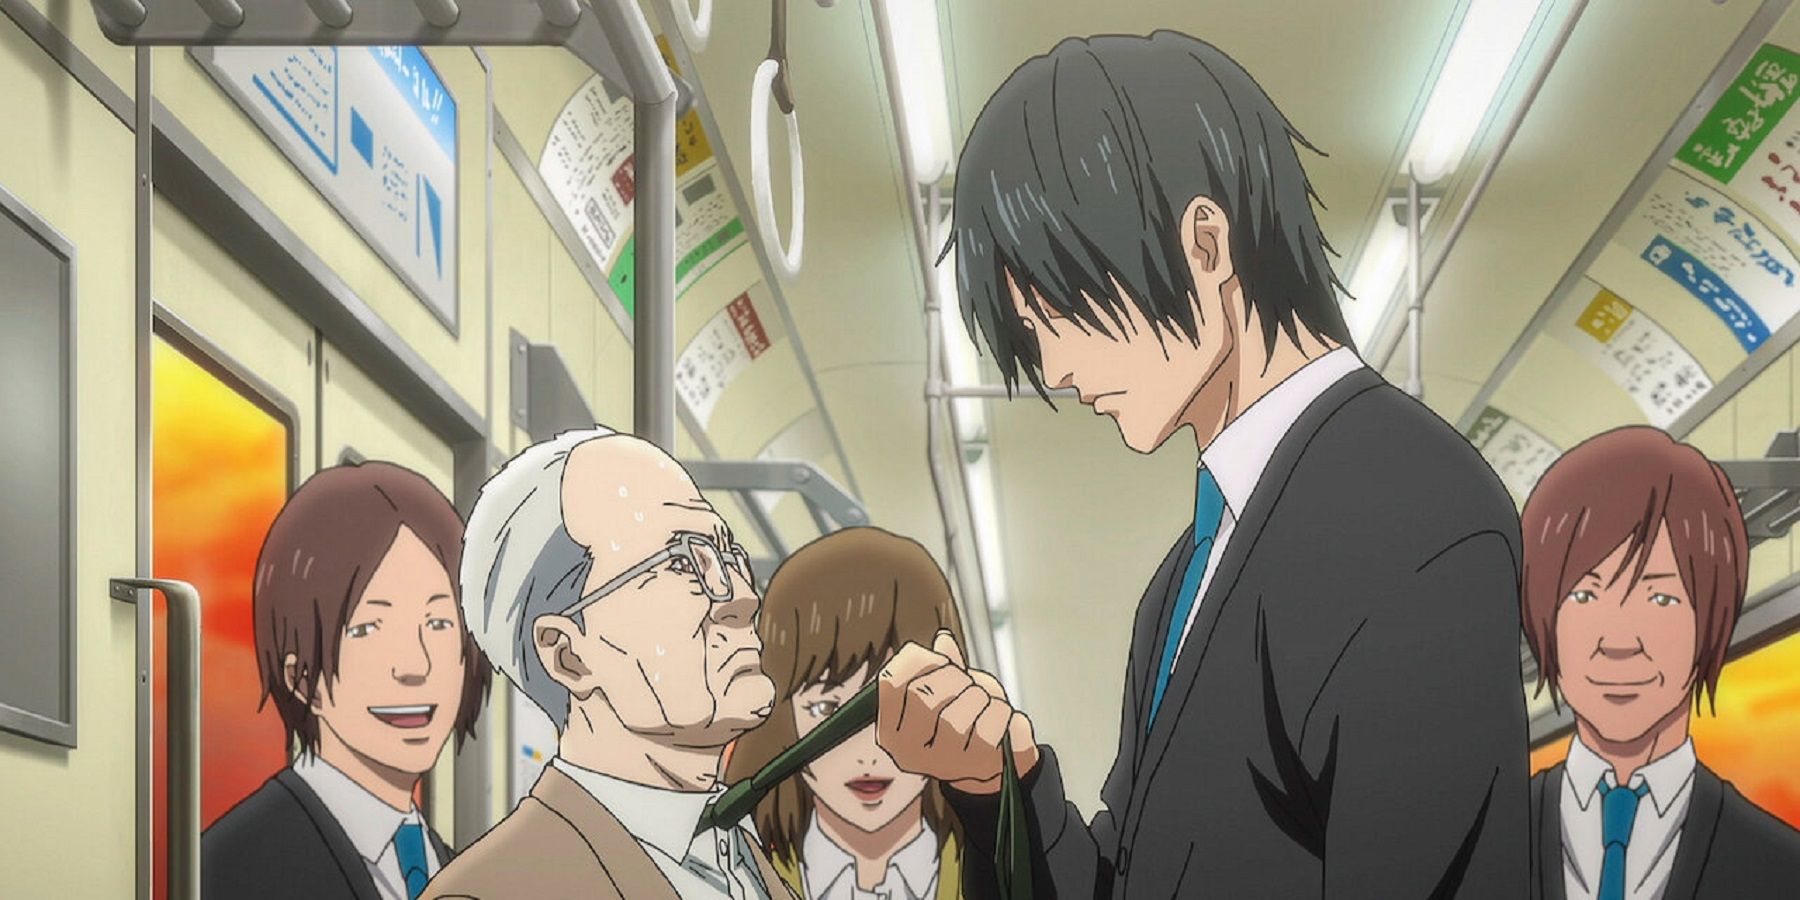 Well, if it isn't the consequences of my own actions [Inuyashiki] : r/anime